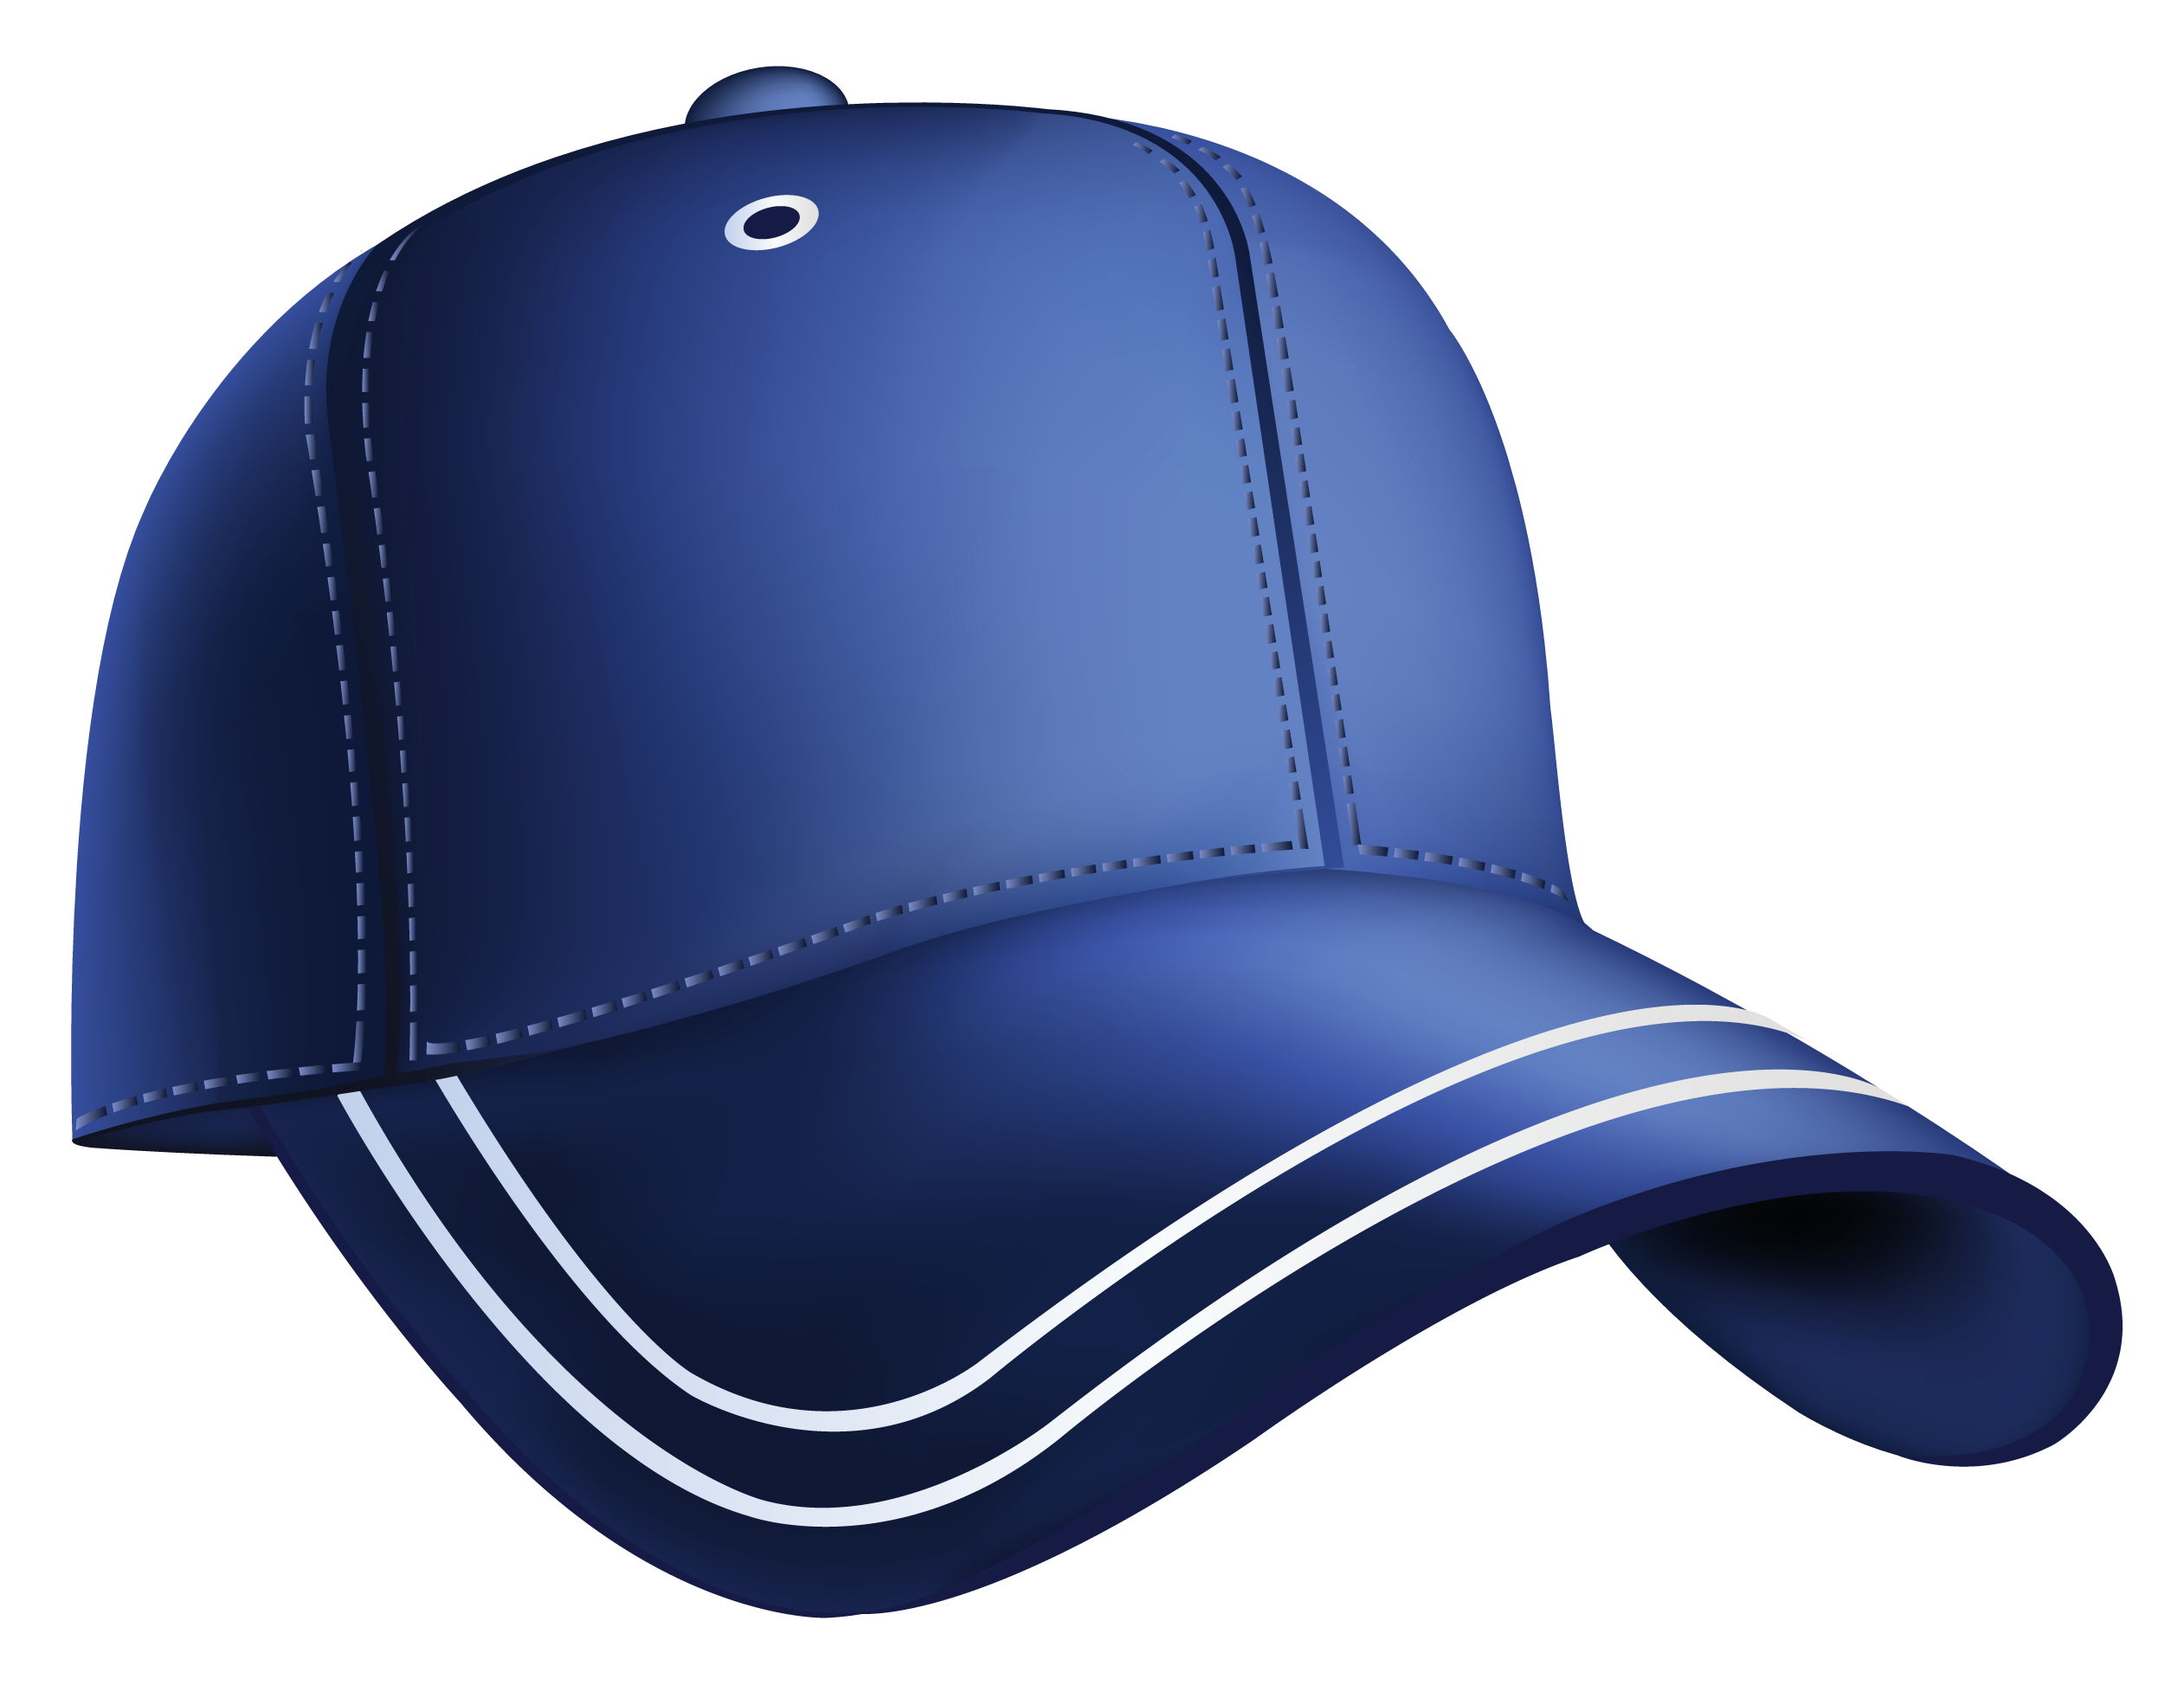 Download Biz Cloth Twill Cap Png Image For Free